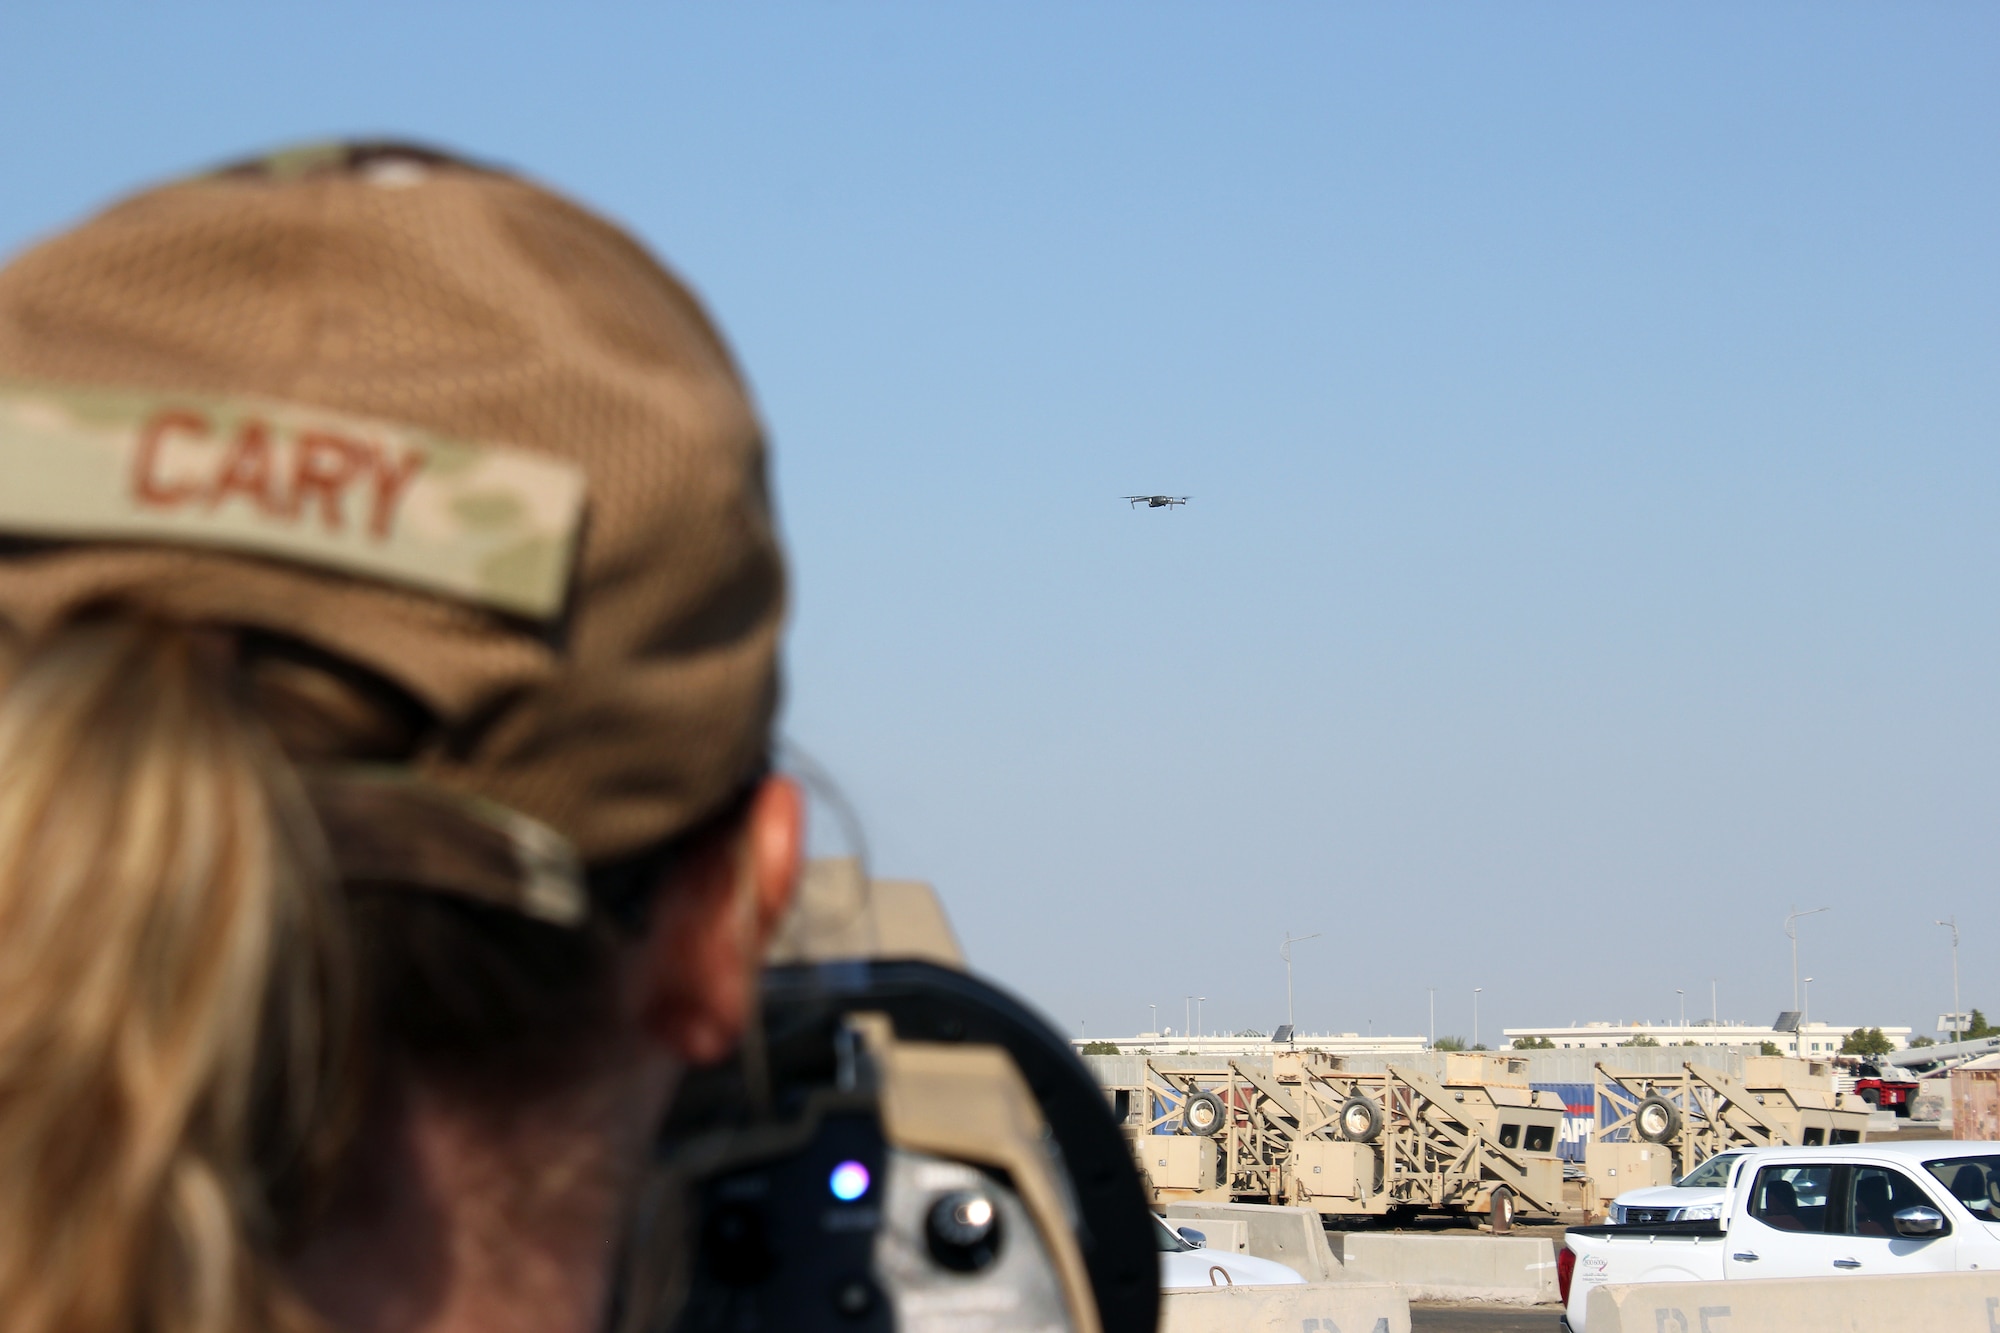 Tech. Sgt. Christina Cary uses a dronebuster to interrupt the signal to an Unmanned Aerial System, during an exercise at Al Dhafra Air Base, United Arab Emirates, Dec. 3, 2021. The 380th Expeditionary Security Forces Squadron at the base has responsibility for countering potential UAS threats.